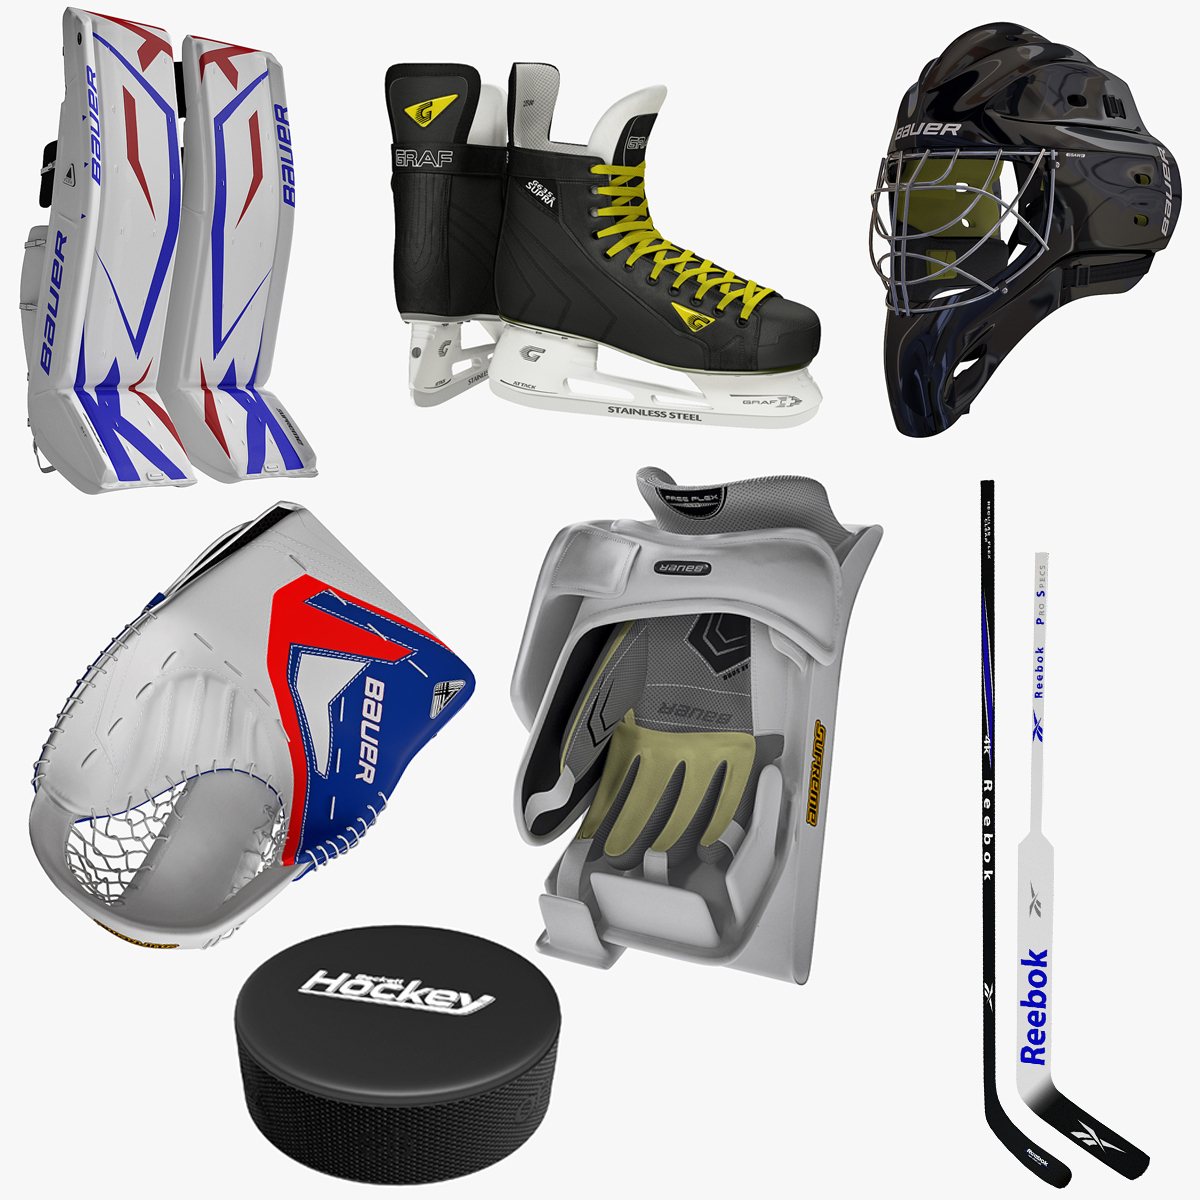 IceHockey Goalkeeper Collection 01 B62d50a6 9f28 4be0 908f 5a75f44f21aaZoom 